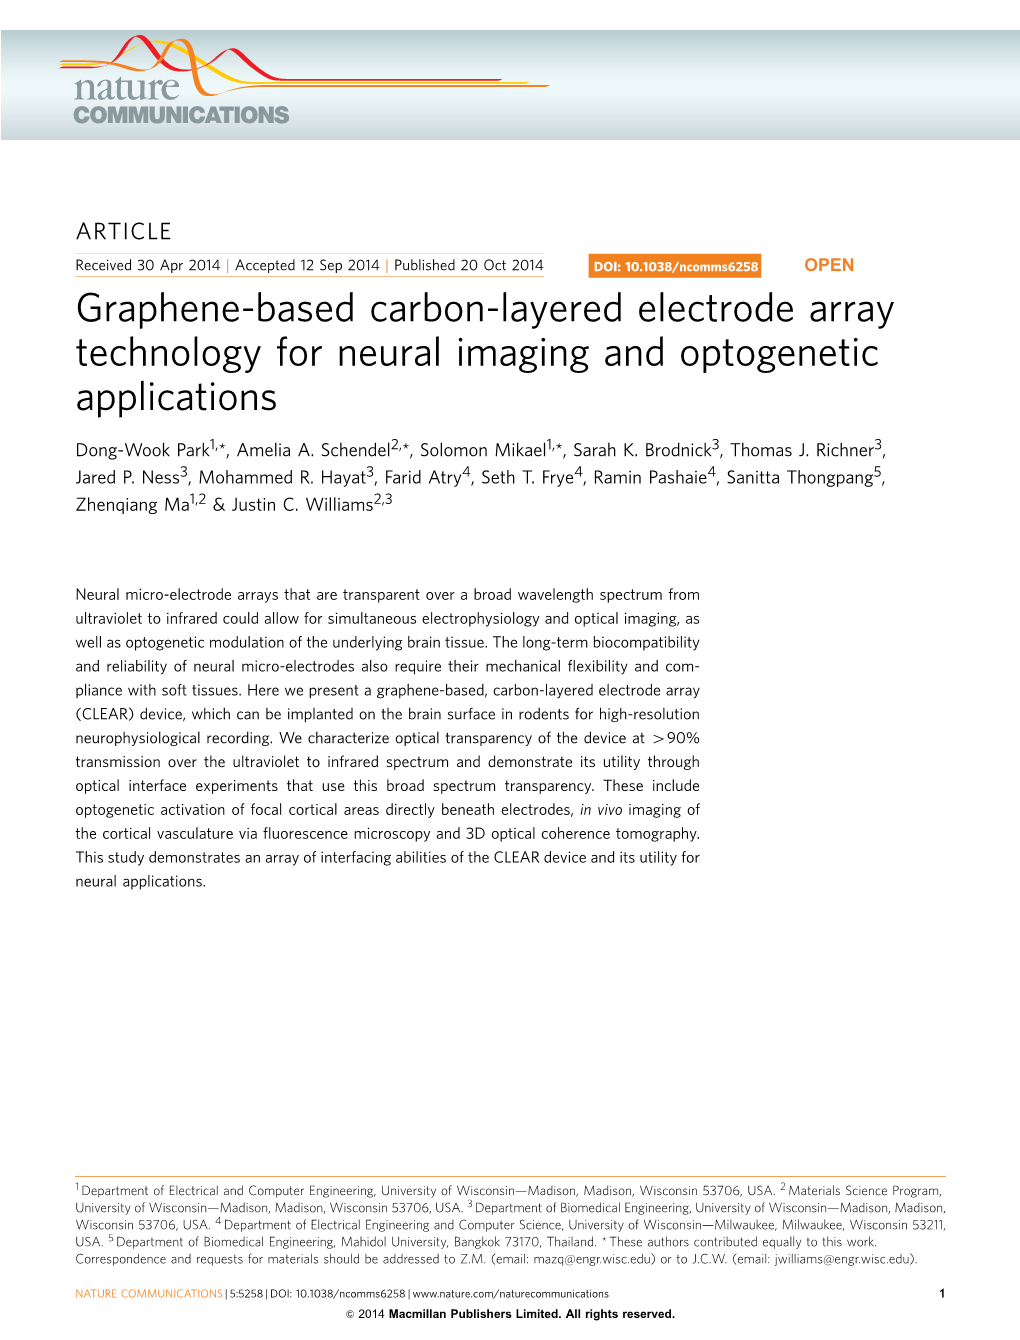 Graphene-Based Carbon-Layered Electrode Array Technology for Neural Imaging and Optogenetic Applications